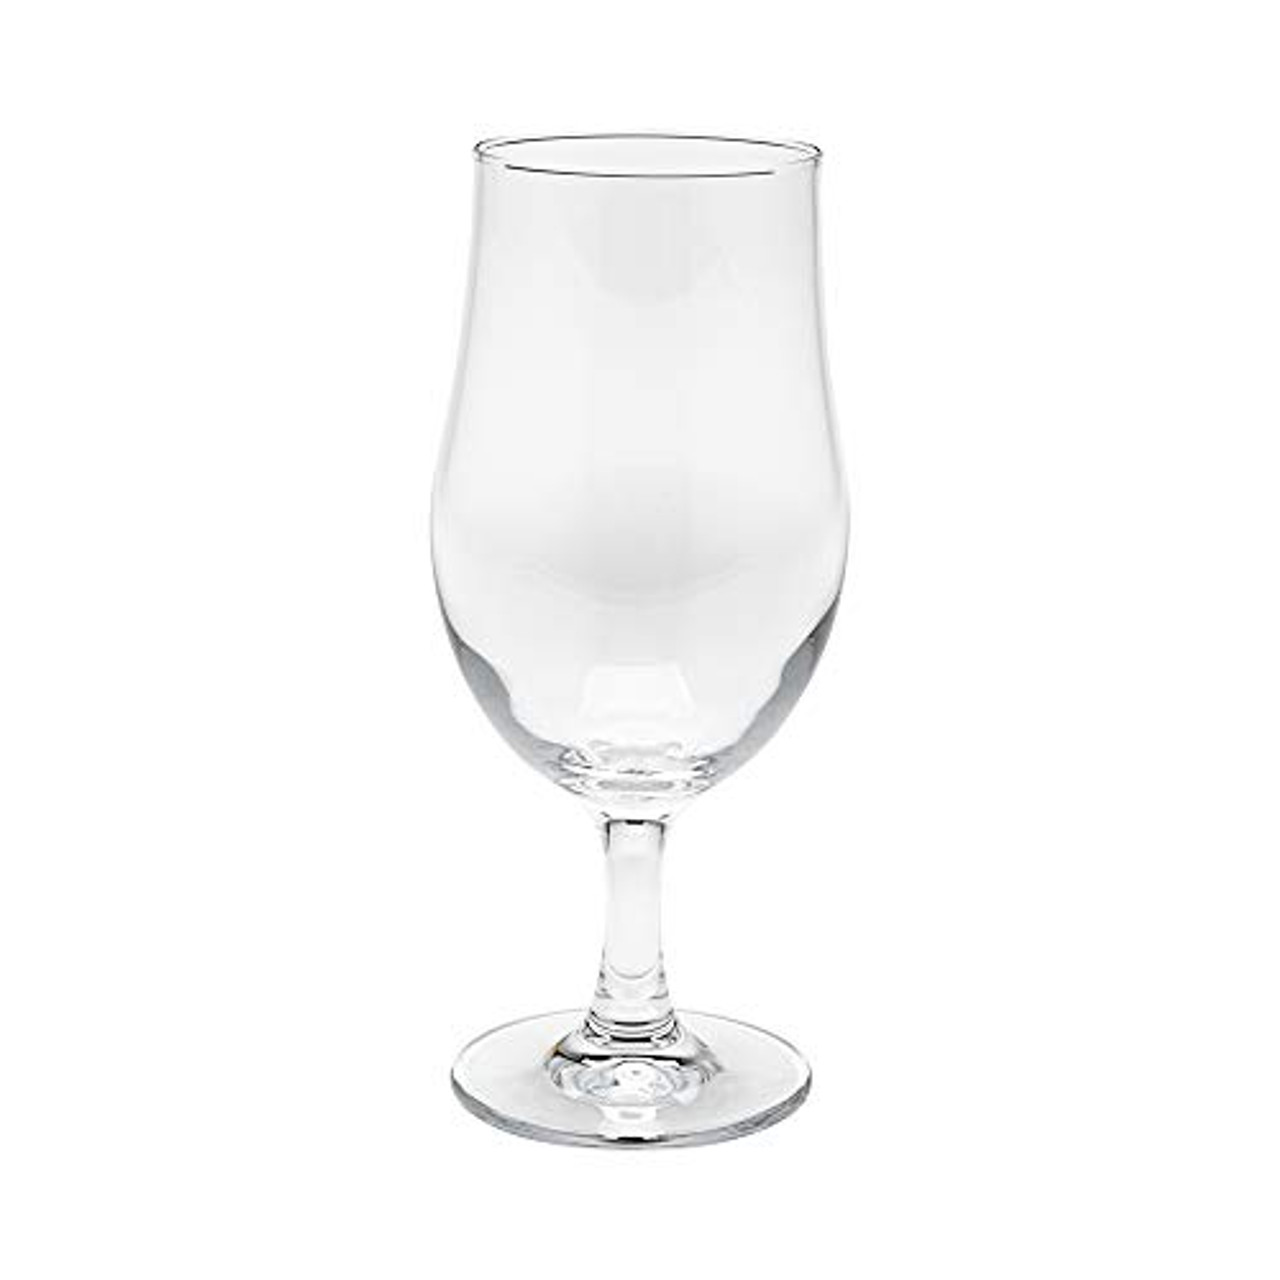 Restaurantware 16 Ounce Craft Beer Glasses, Set Of 6 Flared  Stout -Fine-Blown, Tempered Rim, Narrow Base, Dishwasher-Safe, Clear Glass  Beer Glasses, Lead-Free, For Beers, Ales, Cocktails: Beer Glasses